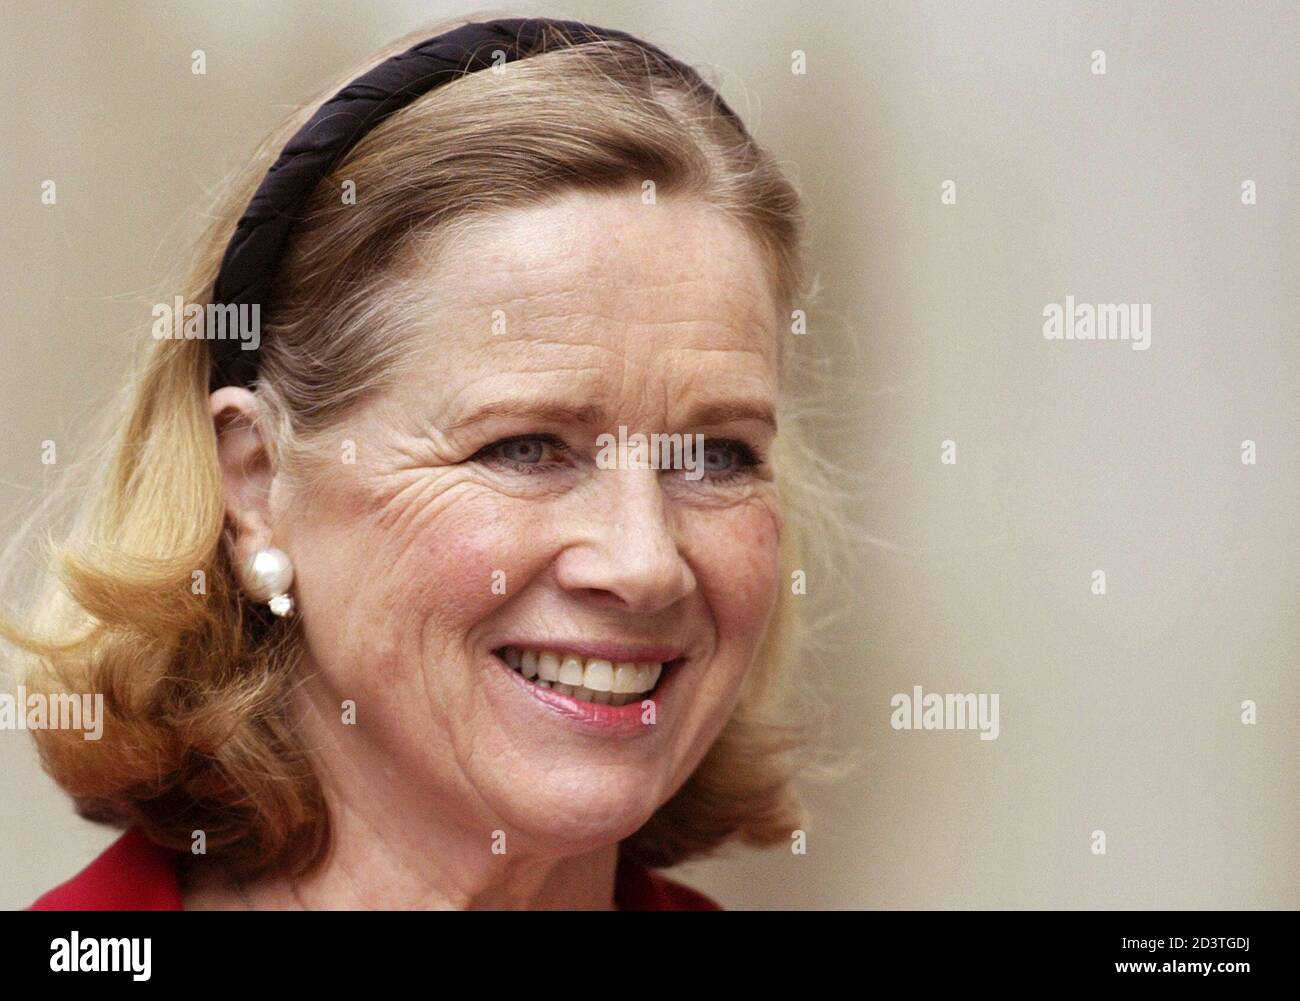 Page 3 - Norwegian Actress High Resolution Stock Photography and Images -  Alamy